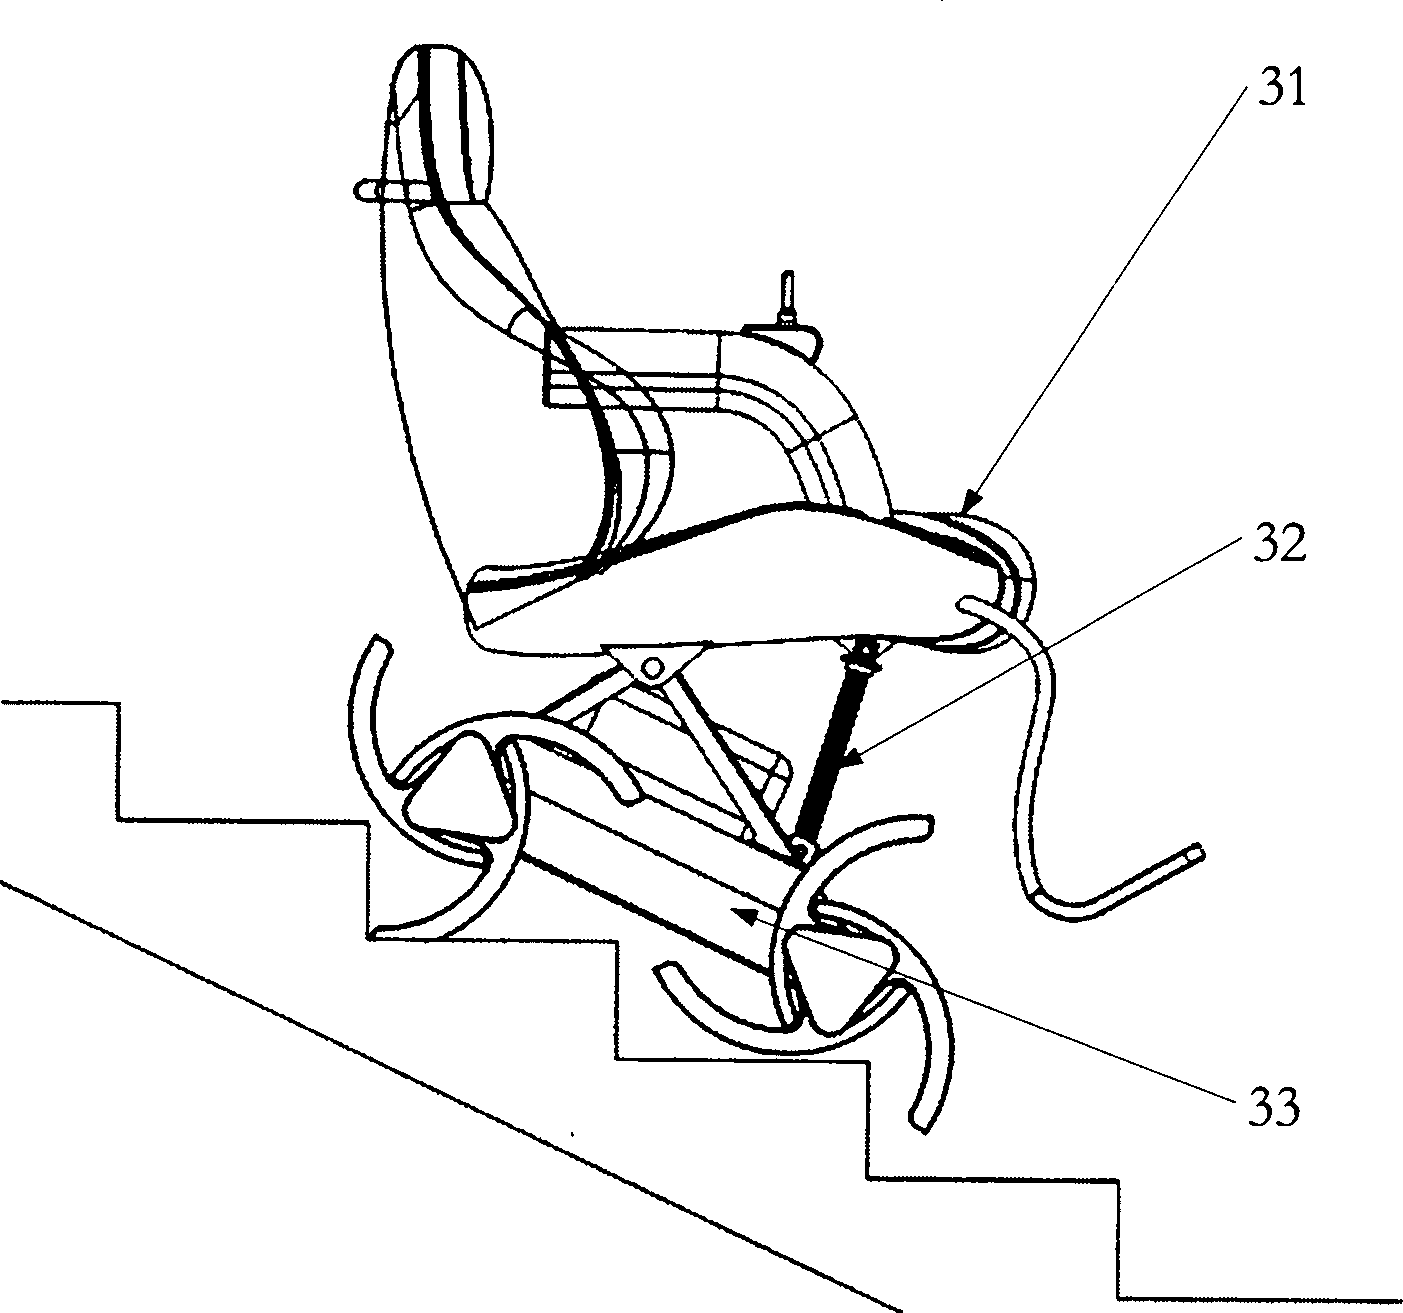 Wheelchair capable of climbing stairs